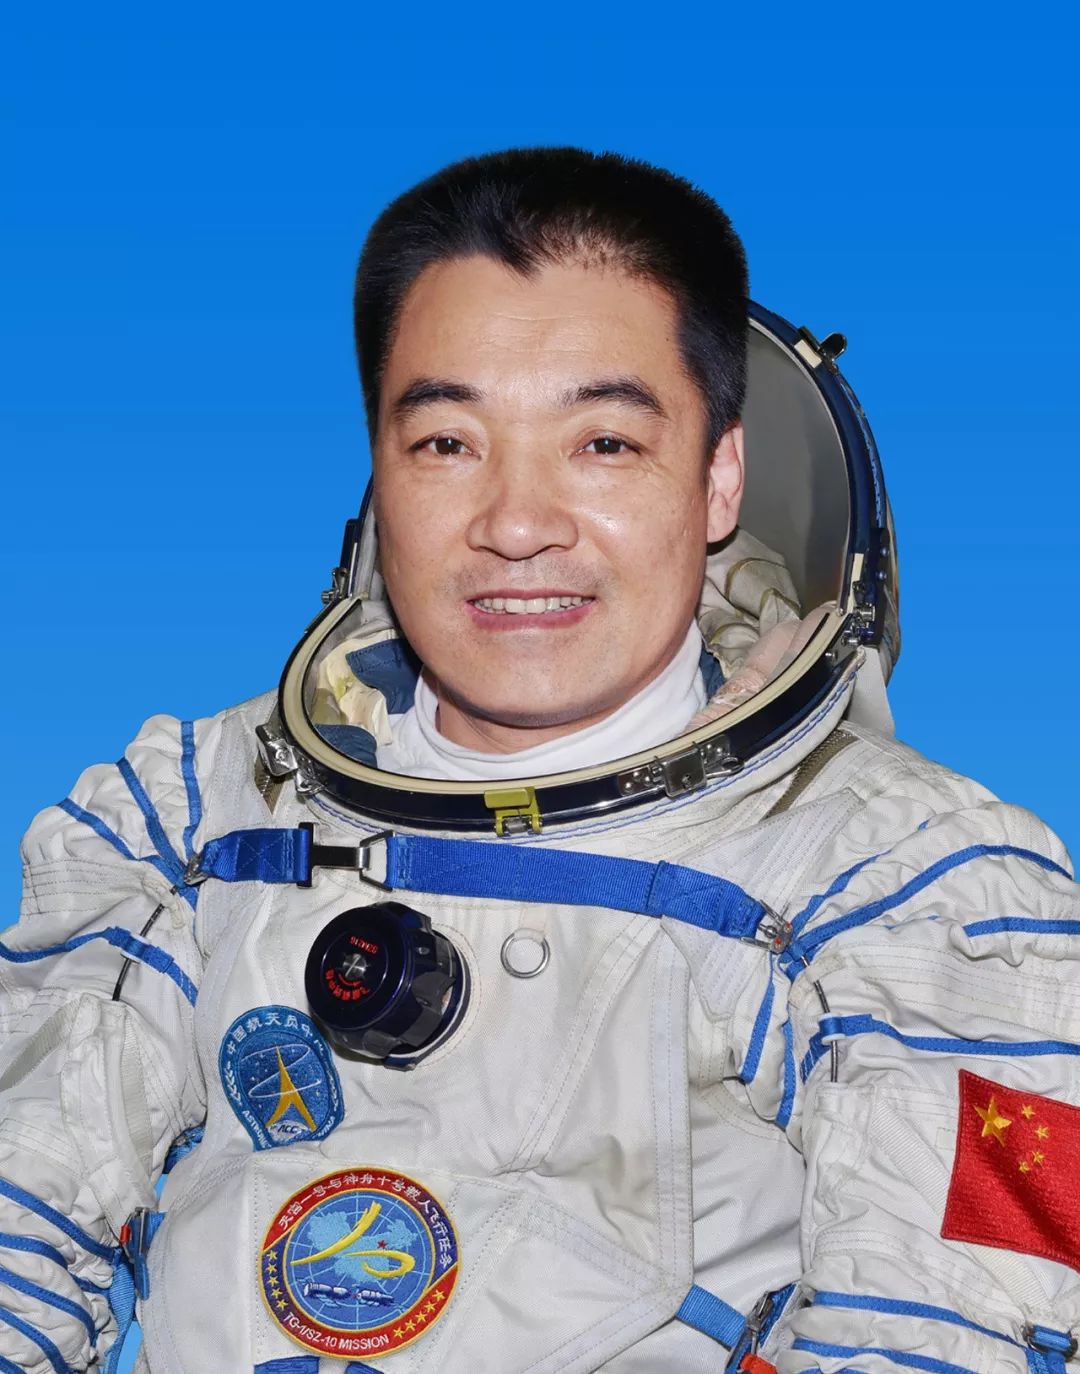 Astronauts ready for takeoff - Chinadaily.com.cn